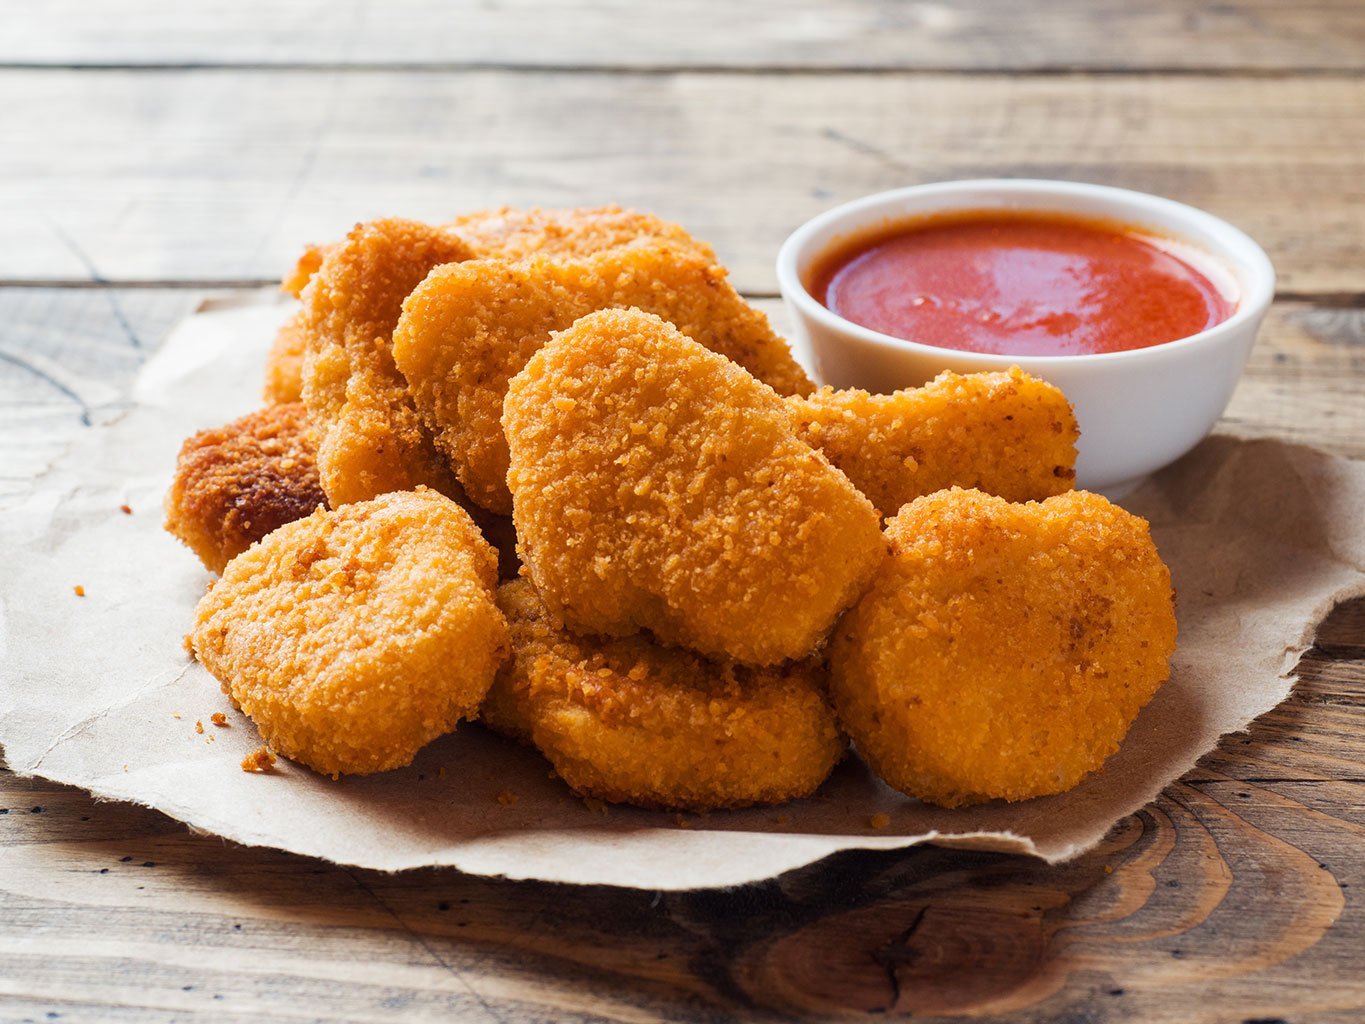 Chicken Nuggets With Tomato Sauce On Wooden Background. Copy Space.